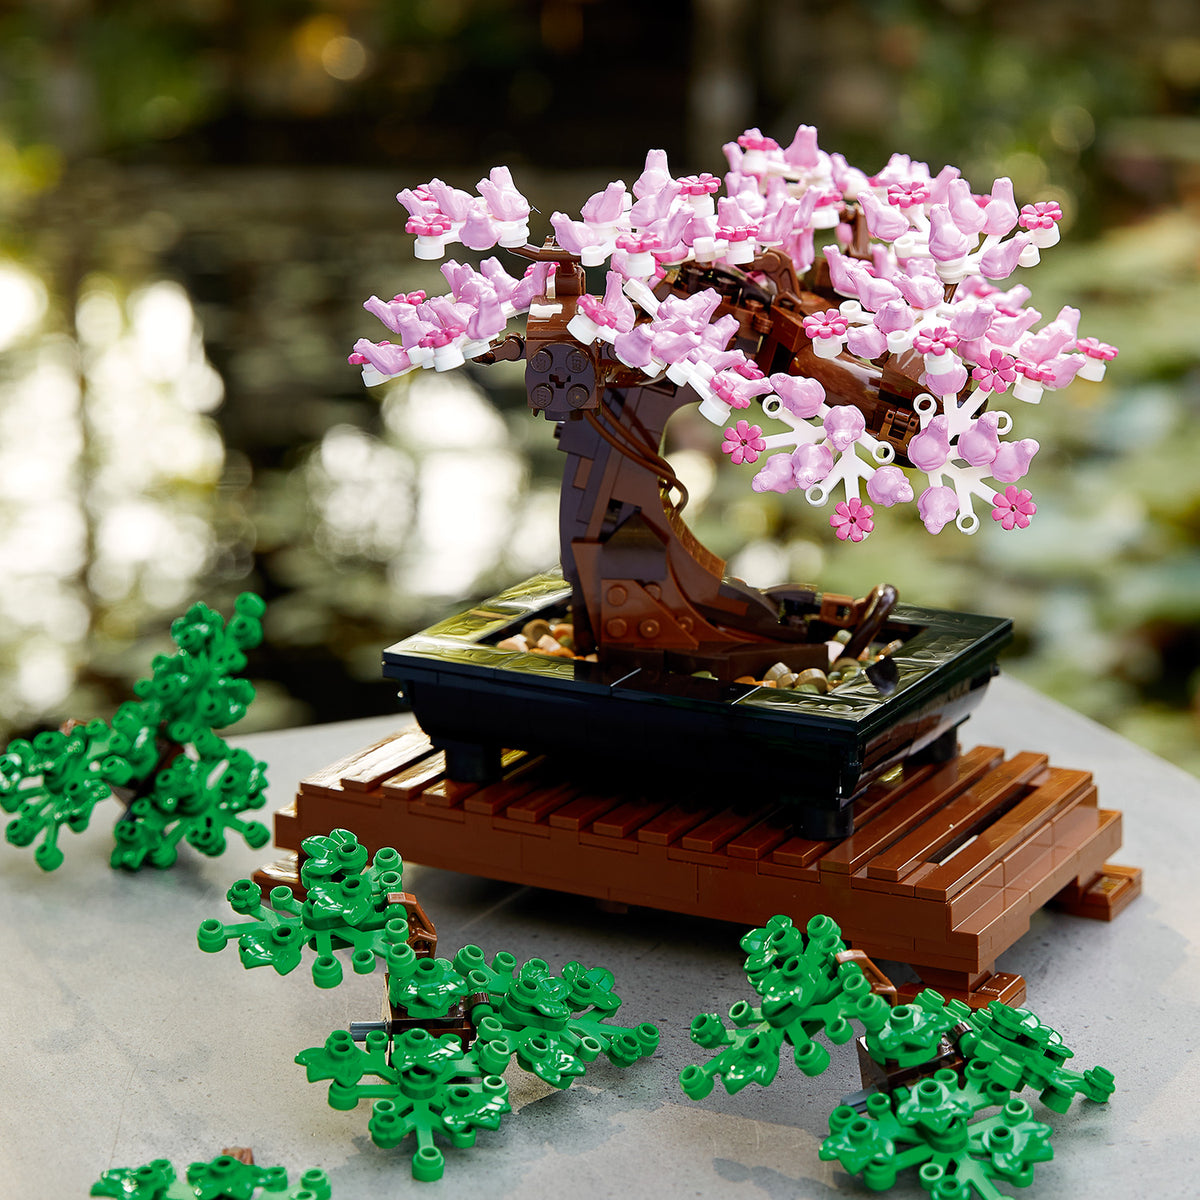 Spruce up Your Garden With LEGO's New Bonsai Tree